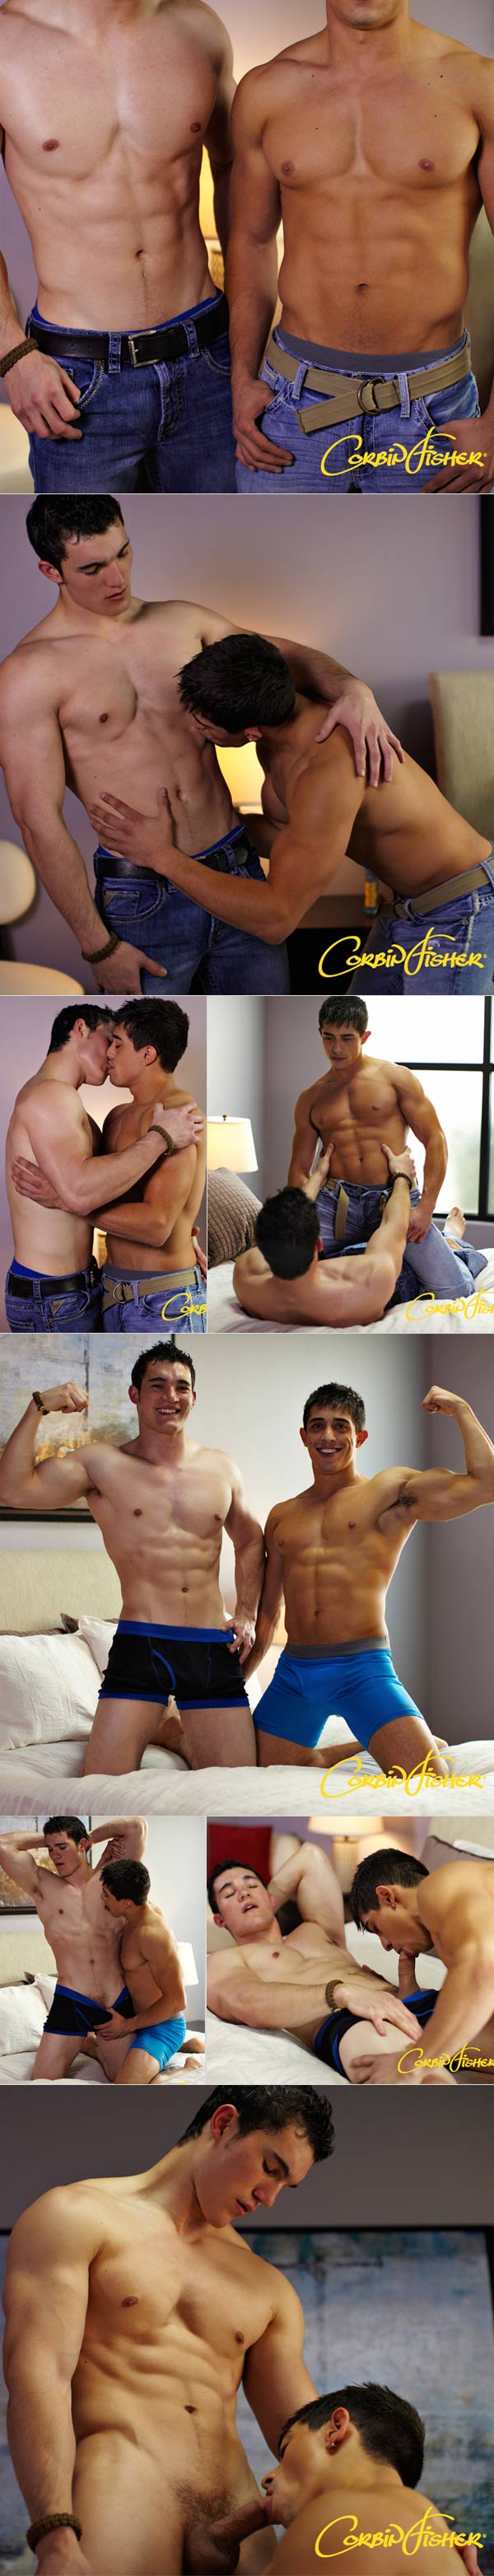 Reed & Sloan (Reed's First Time) at CorbinFisher